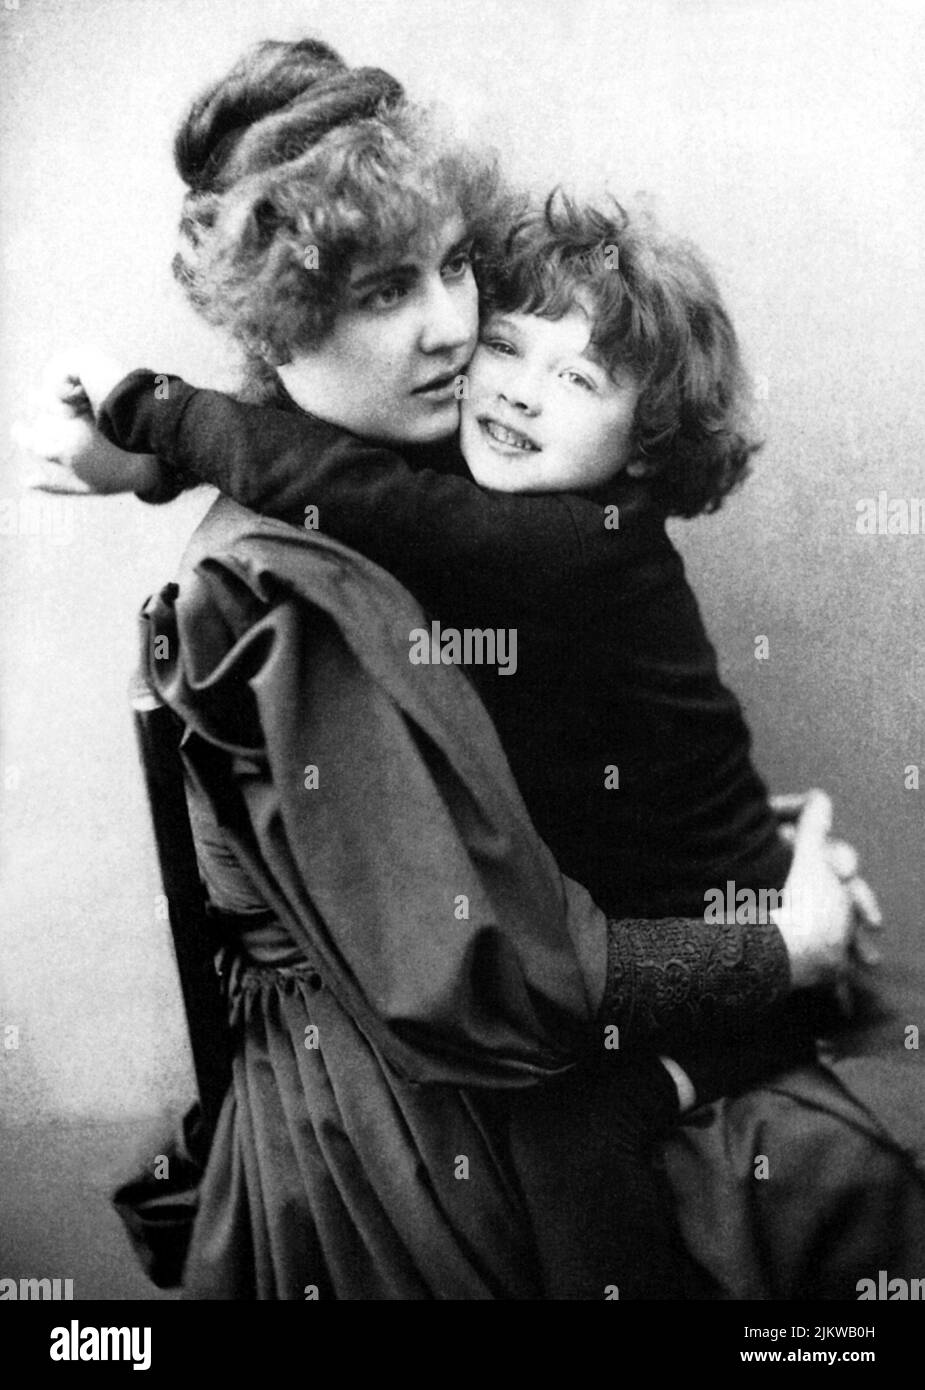 1889 , London , England    :  CONTANCE LLOYD , married to celebrated  irish writer and dramatist OSCAR WILDE ( 1854 - 1900 ), with the son CYRIL WILDE aged five years old   - SCRITTORE - LETTERATURA - LITERATURE - POET - POETA - POESIA - DRAMMATURGO - playwriter - play-writer - TEATRO - THEATER - THEATRE  - POETRY   - GAY - HOMOSEXUALITY - HOMOSEXUAL - omosessuale - omosessualità  - madre mamma e figlio - smile - sorriso  ----  Archivio GBB Stock Photo